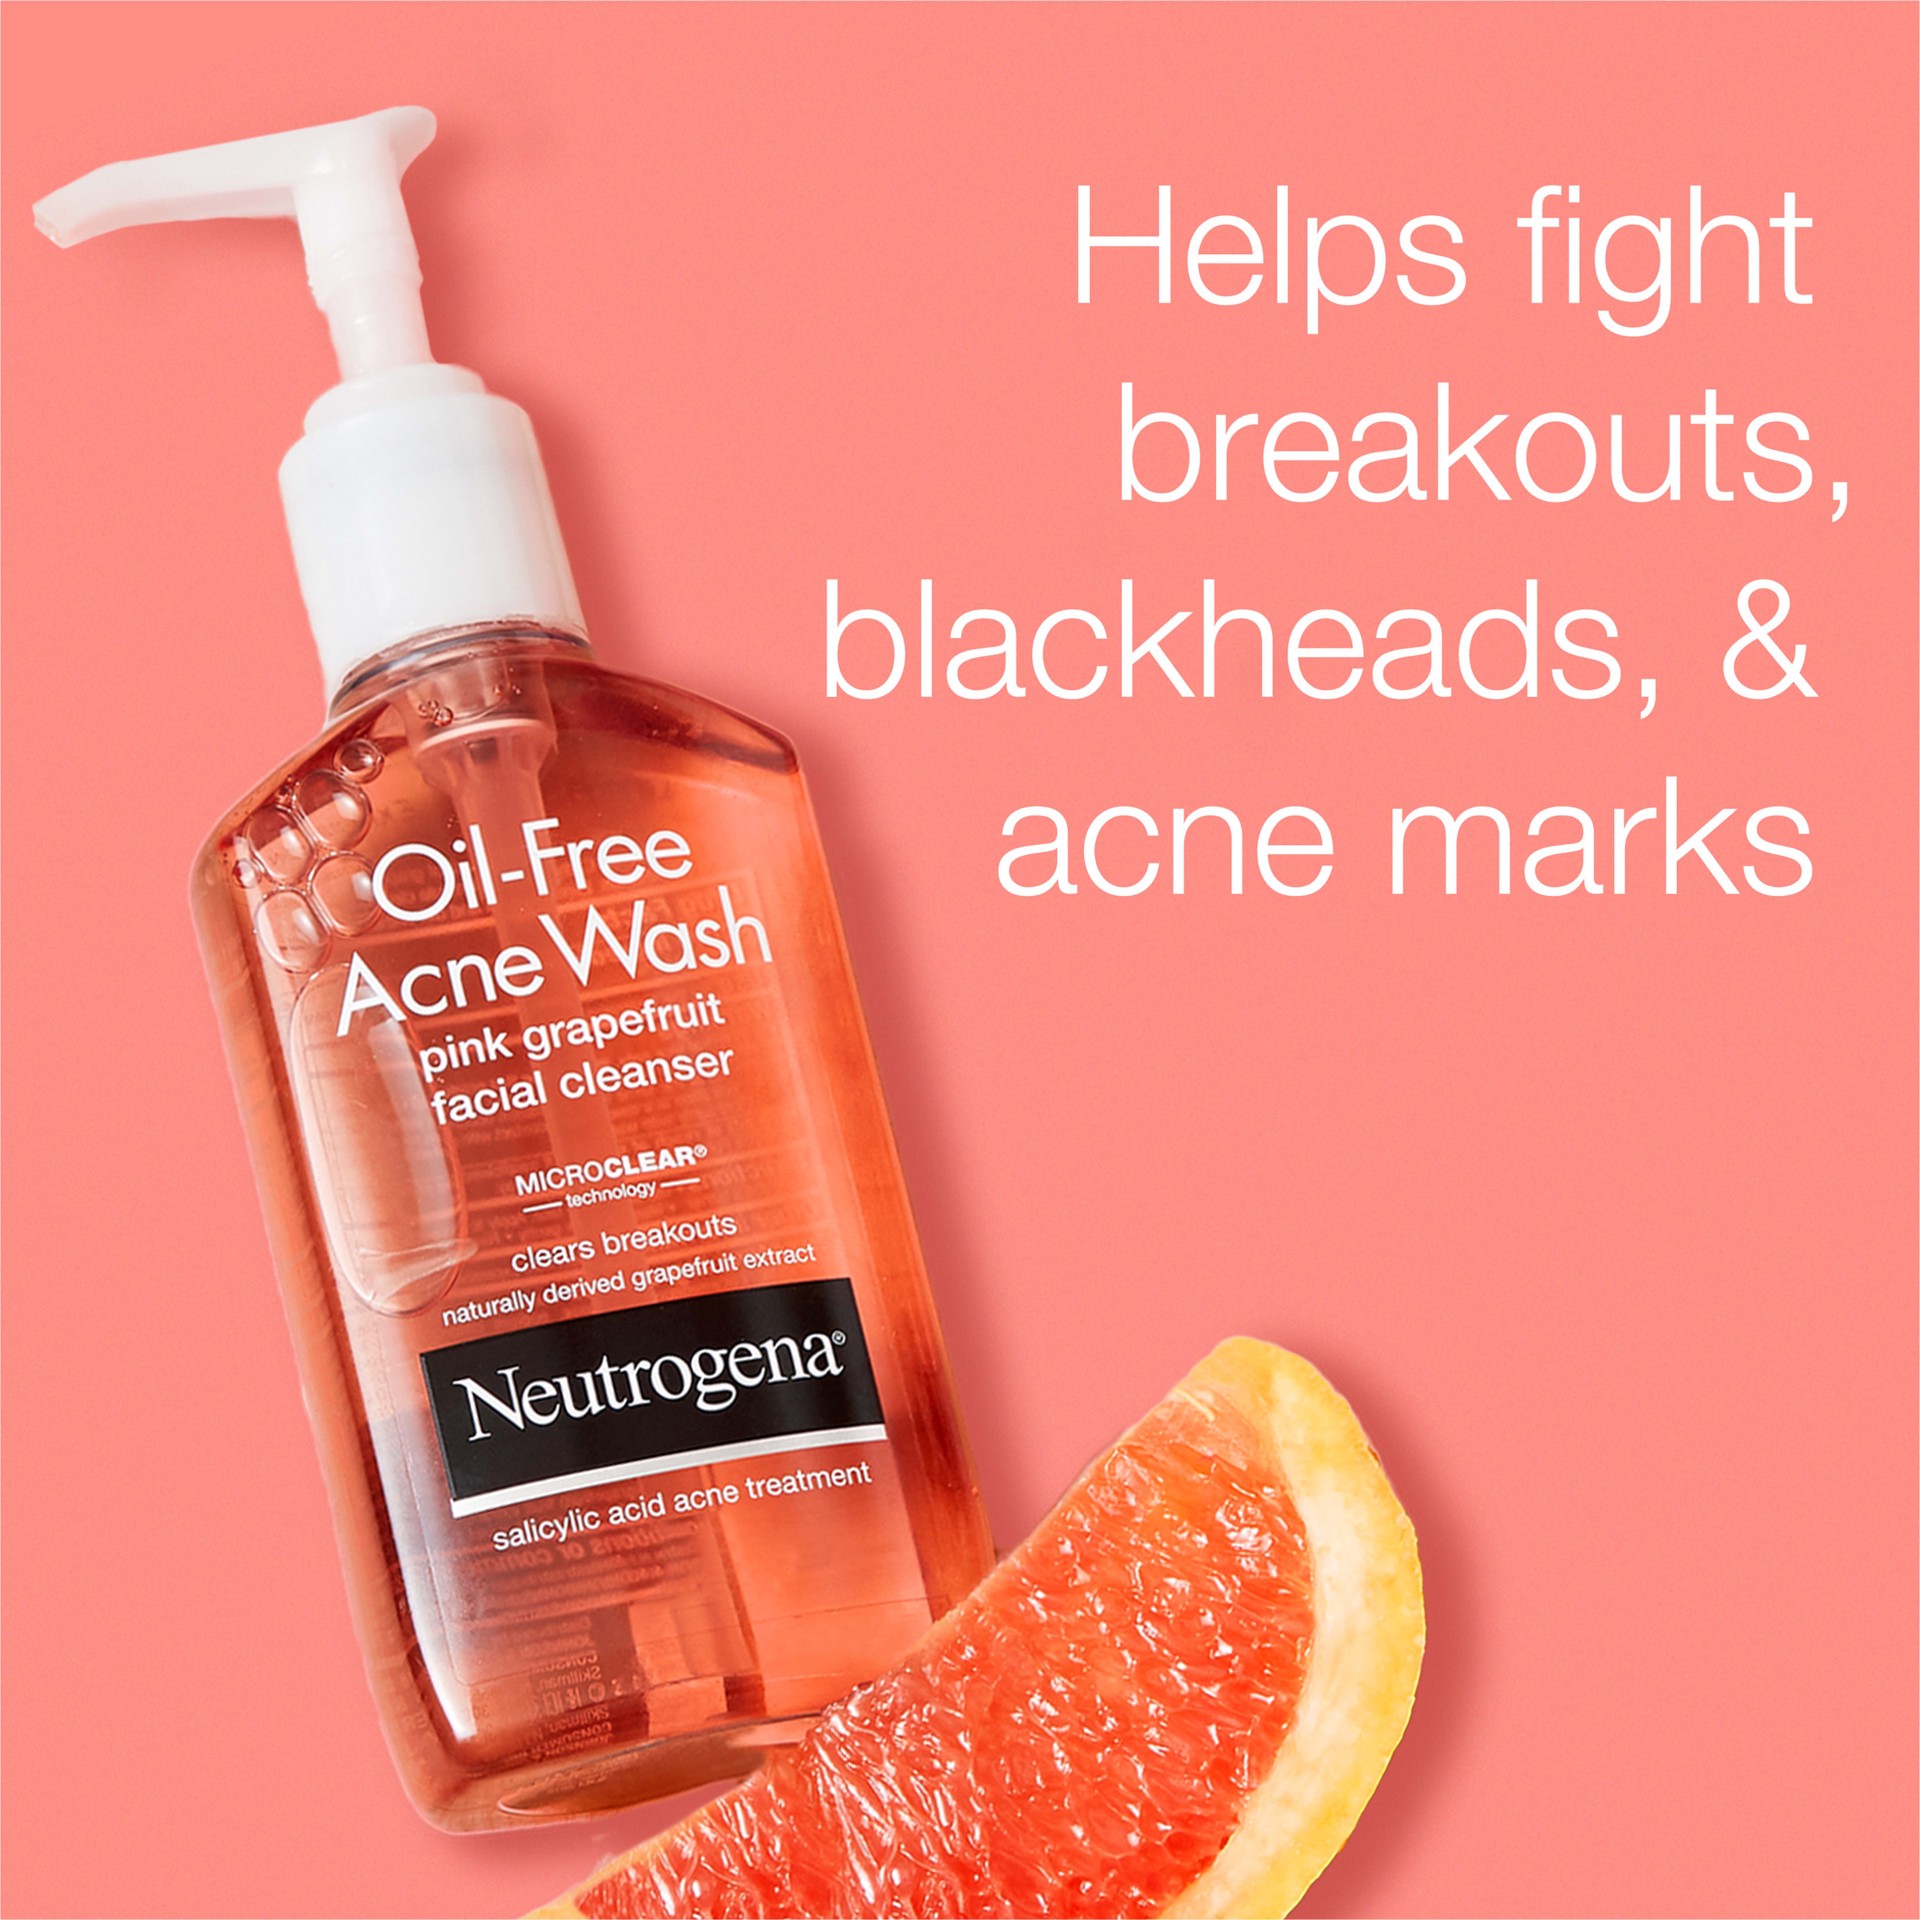 slide 6 of 10, Neutrogena Oil-Free Pink Grapefruit Pore Cleansing Acne Wash and Daily Liquid Facial Cleanser with 2% Salicylic Acid Acne Medicine and Vitamin C, 6 fl. oz, 6 oz